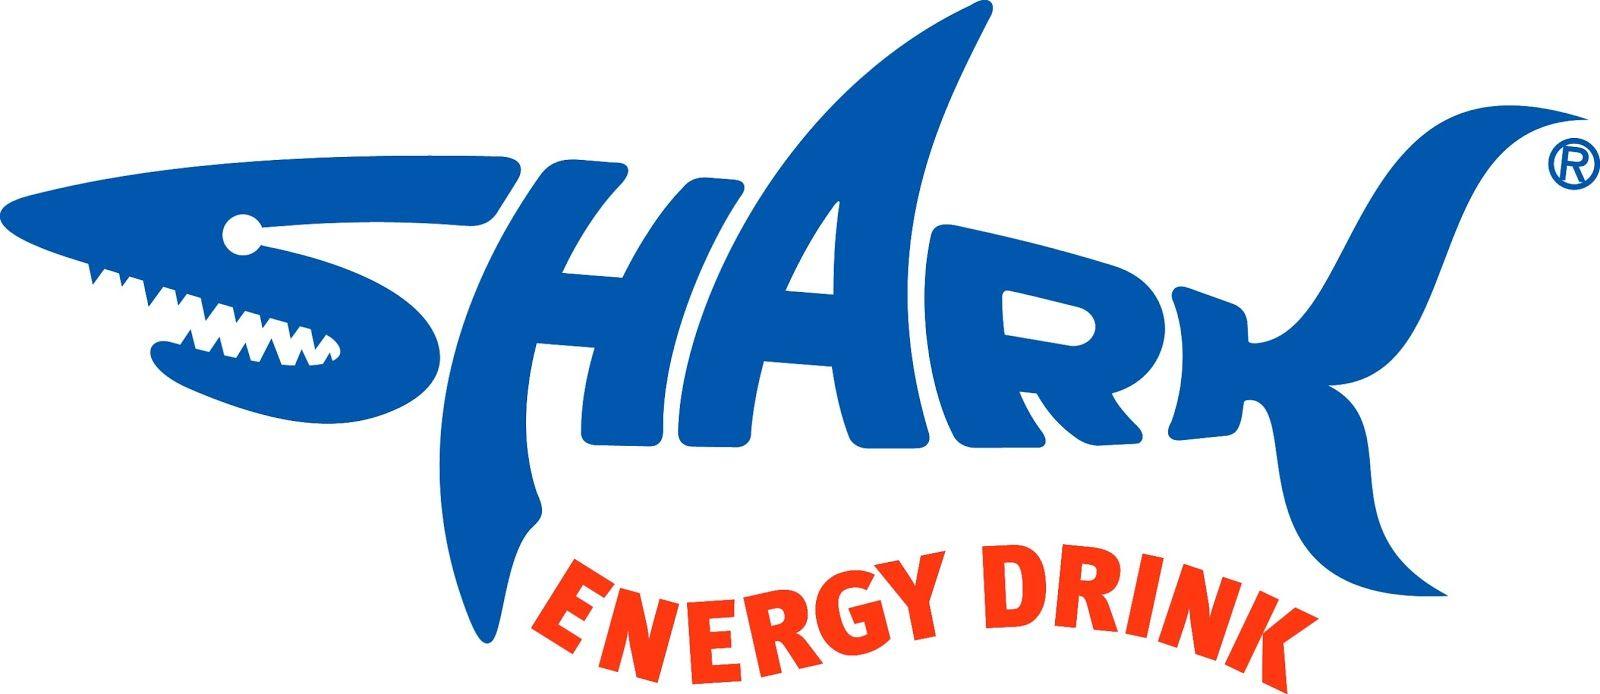 Energy Drink Logo - Shark Energy Drink logo - Clever use of letters [1600 x 694] - Imgur